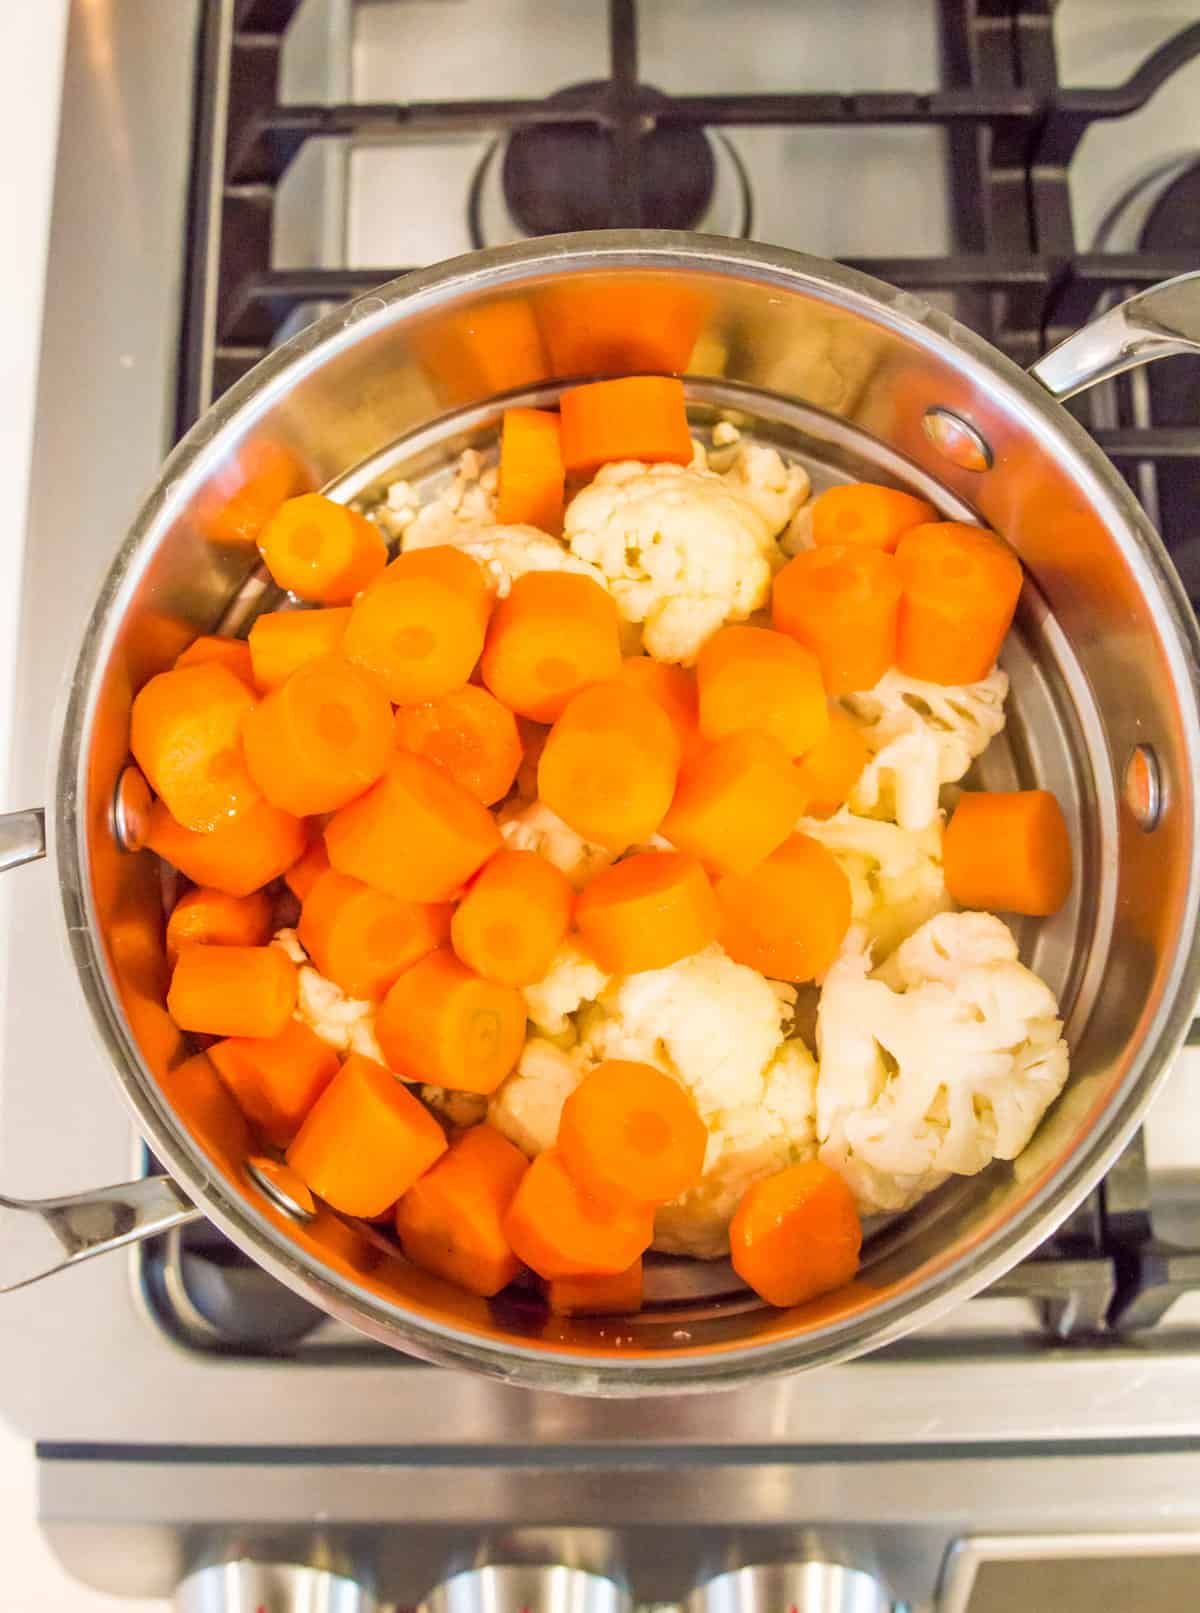 A pot on the stove with chopped carrots and cauliflower florets in it.